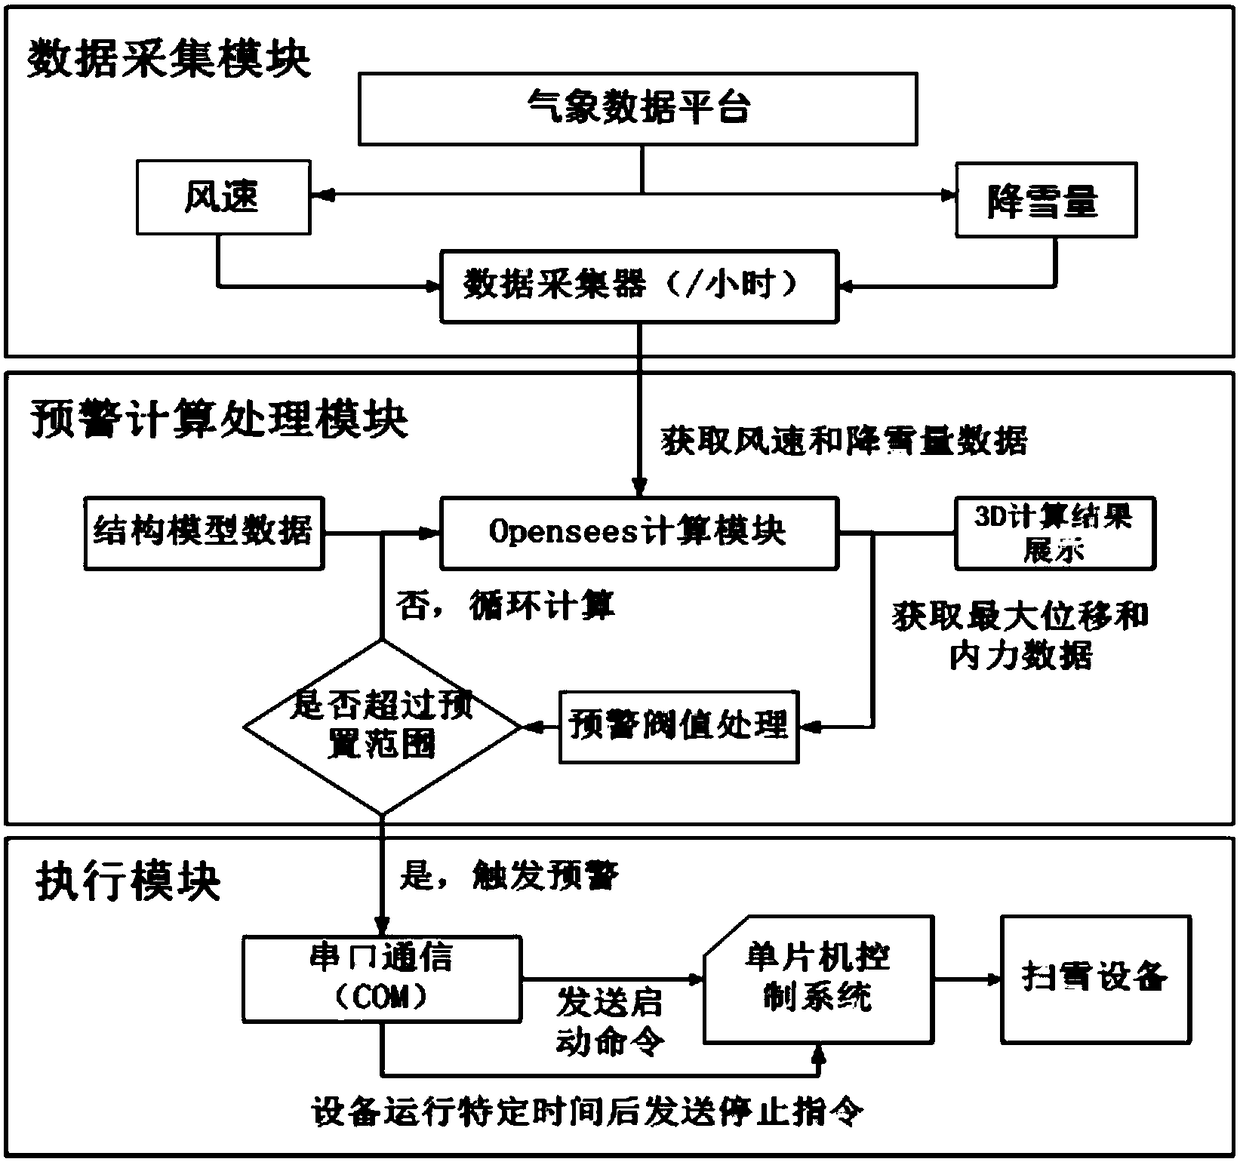 Agricultural building structure early warning processing system